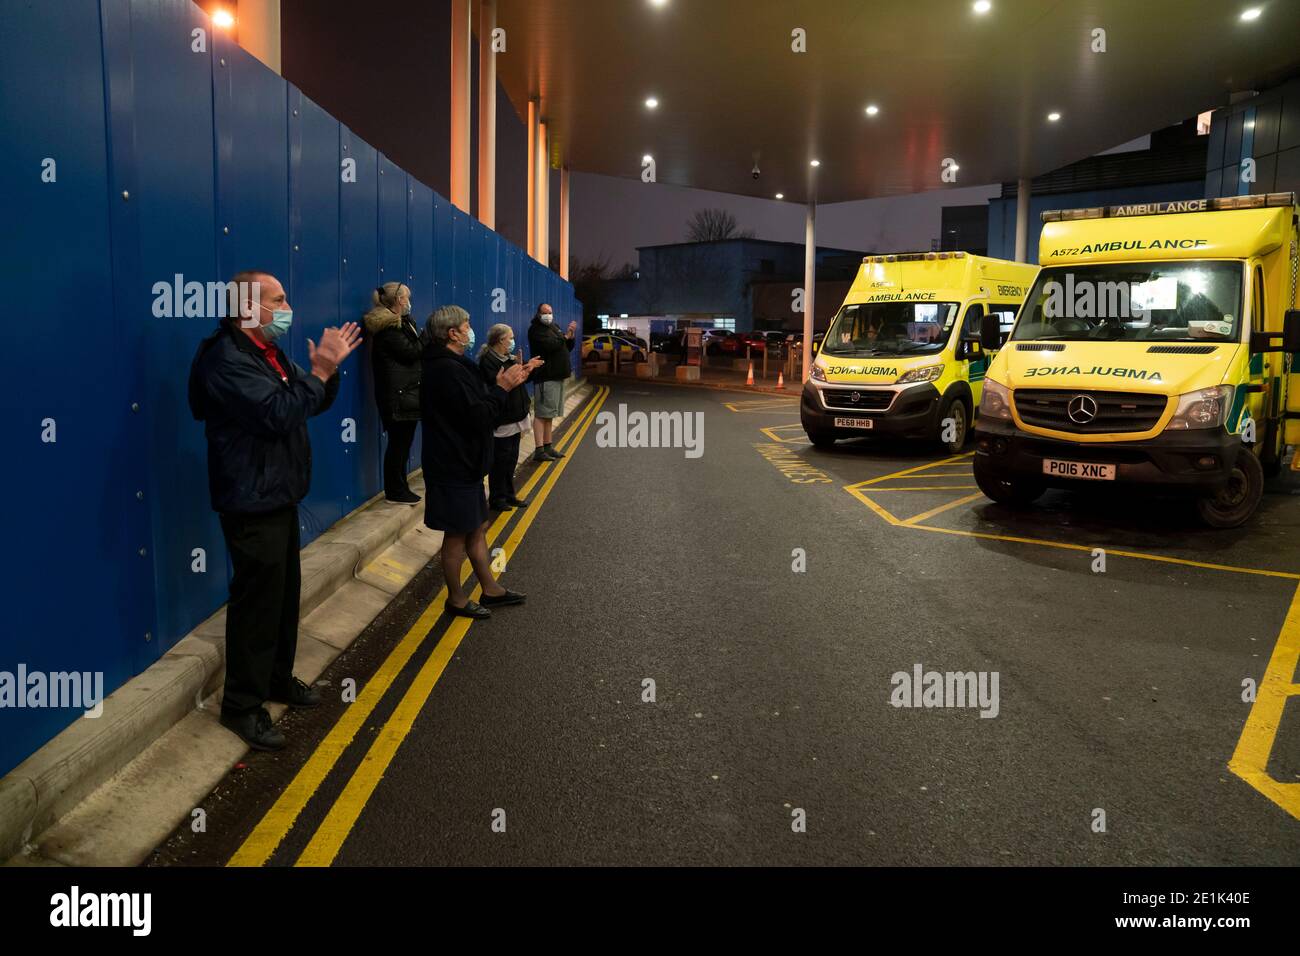 Manchester, UK. 7th Jan 2021. Members of the public applaud at Salford Royal Hospital as Clap for Carers returns under a new name of Clap for Heroes. The weekly applause for front-line NHS staff and other key workers ran for 10 weeks during the UK's first coronavirus lockdown. Credit: Jon Super/Alamy Live News Stock Photo